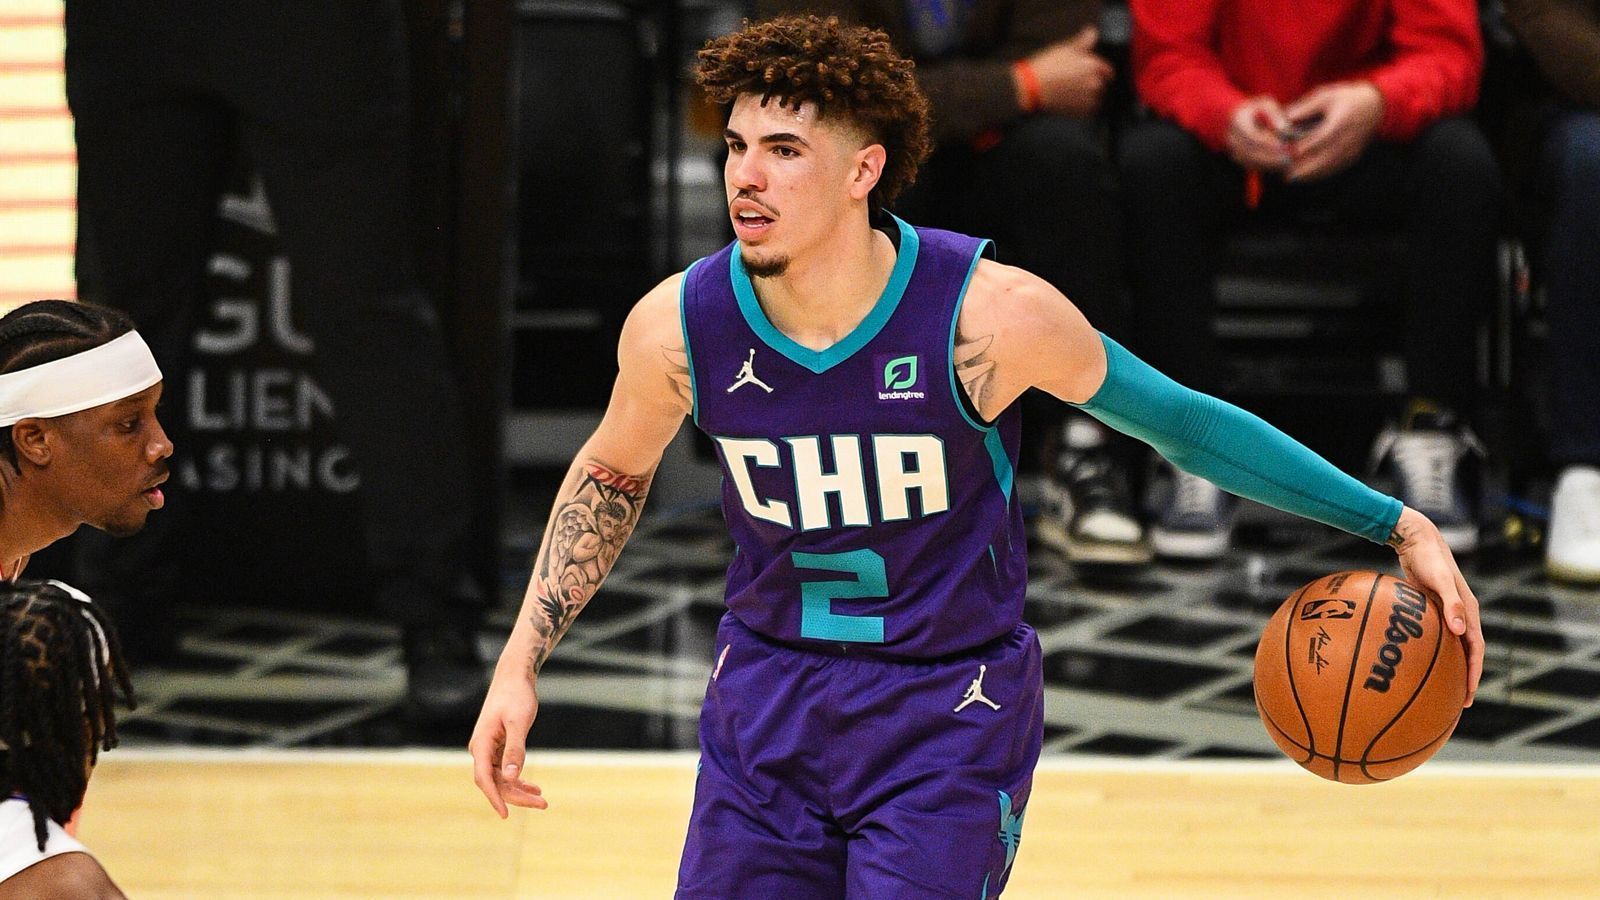 
                <strong>15. Platz: LaMelo Ball (Charlotte Hornets)</strong><br>
                &#x2022; 39 Spiele - <br>&#x2022; 19,0 Points pro Spiel - <br>&#x2022; 7,3 Rebounds pro Spiel - <br>&#x2022; 7,7 Assists pro Spiel -<br>&#x2022; 37,1% Dreierquote - <br>
              